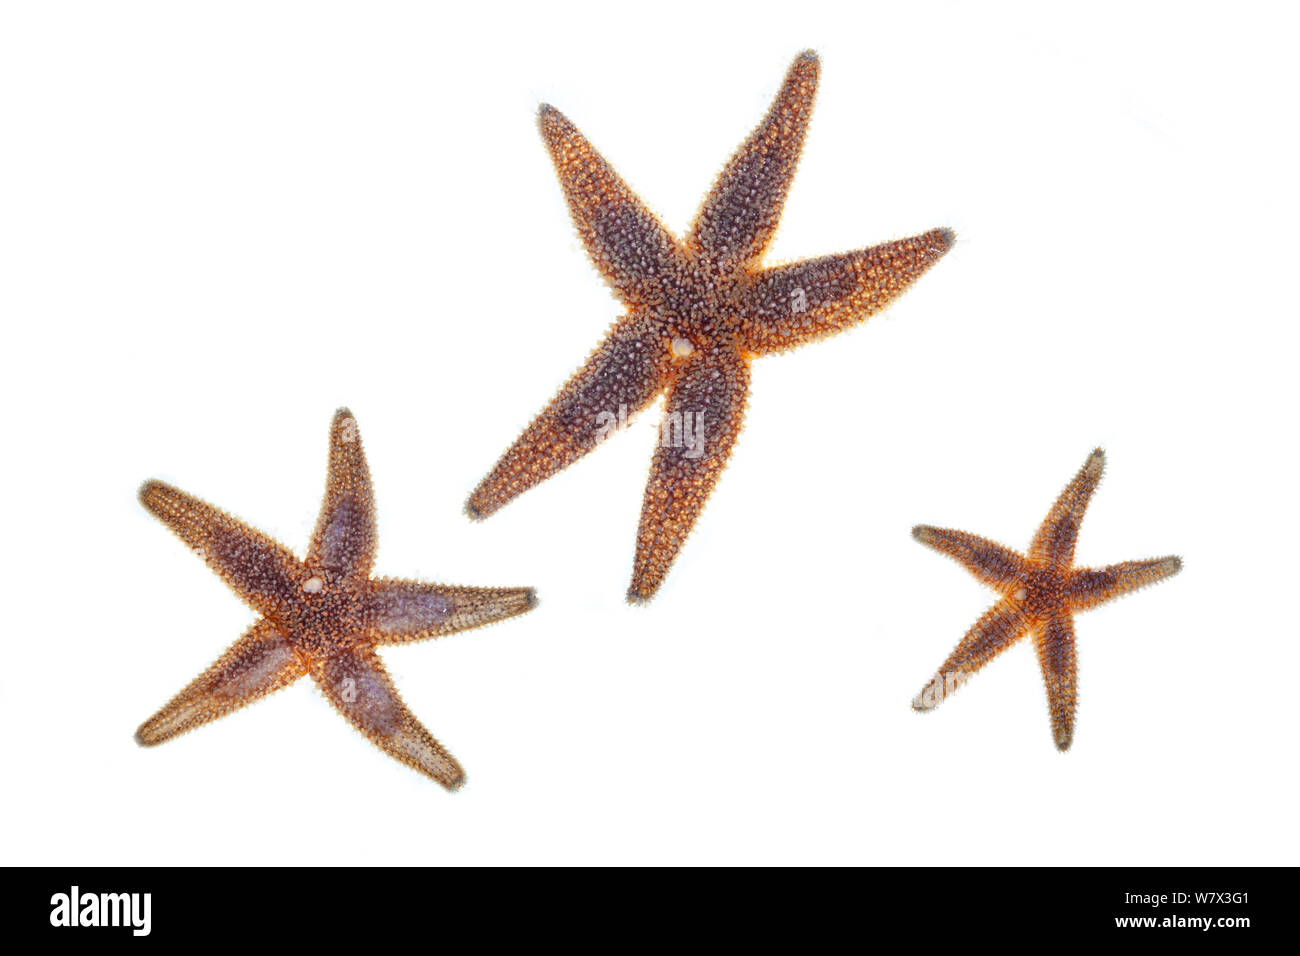 Common starfish (Asterias rubens), photographed in mobile field studio on a white background. Isle of Mull, Scotland, UK. June. Stock Photo